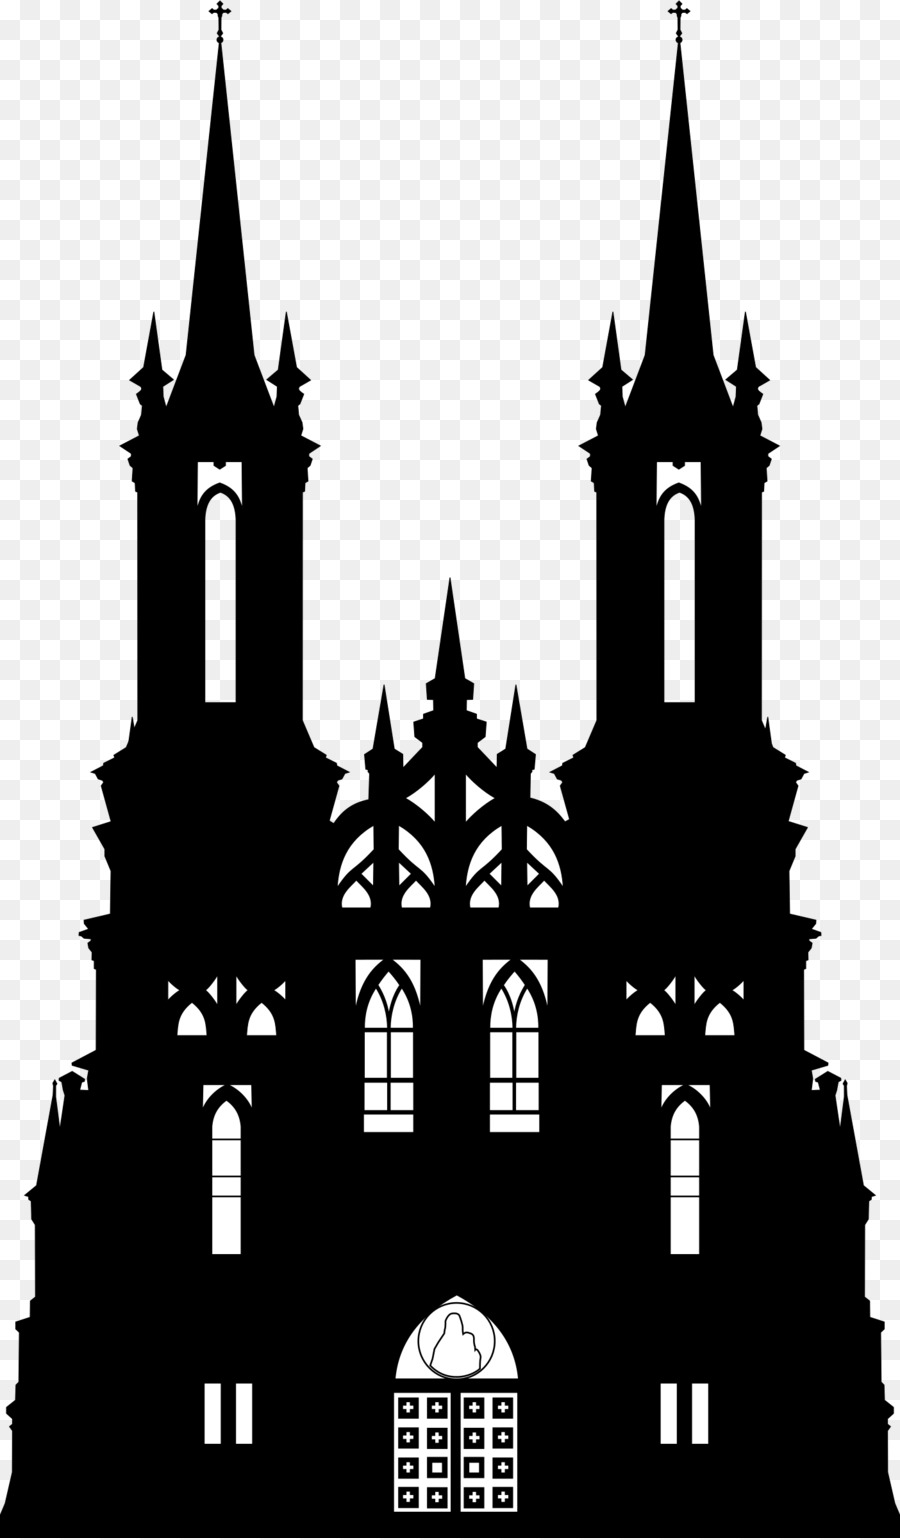 Silhouette Gothic architecture Castle Clip art - catholic png download - 1404*2400 - Free Transparent Silhouette png Download.